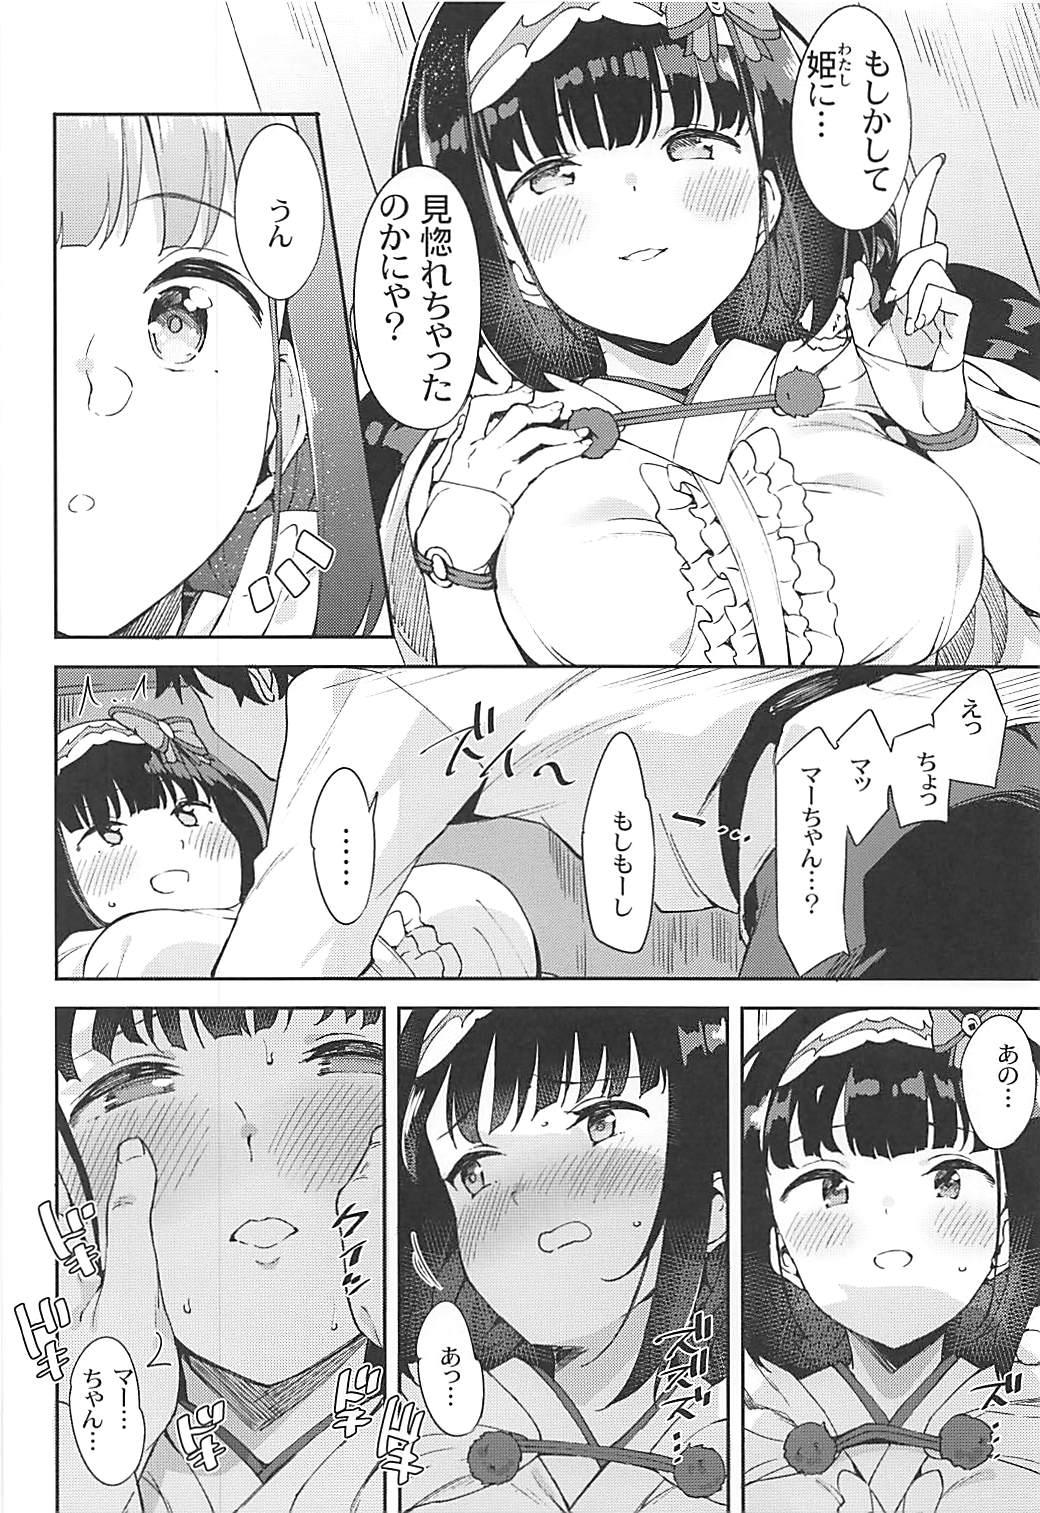 Forbidden Osakabehime to Himegoto - Fate grand order Tgirls - Page 7